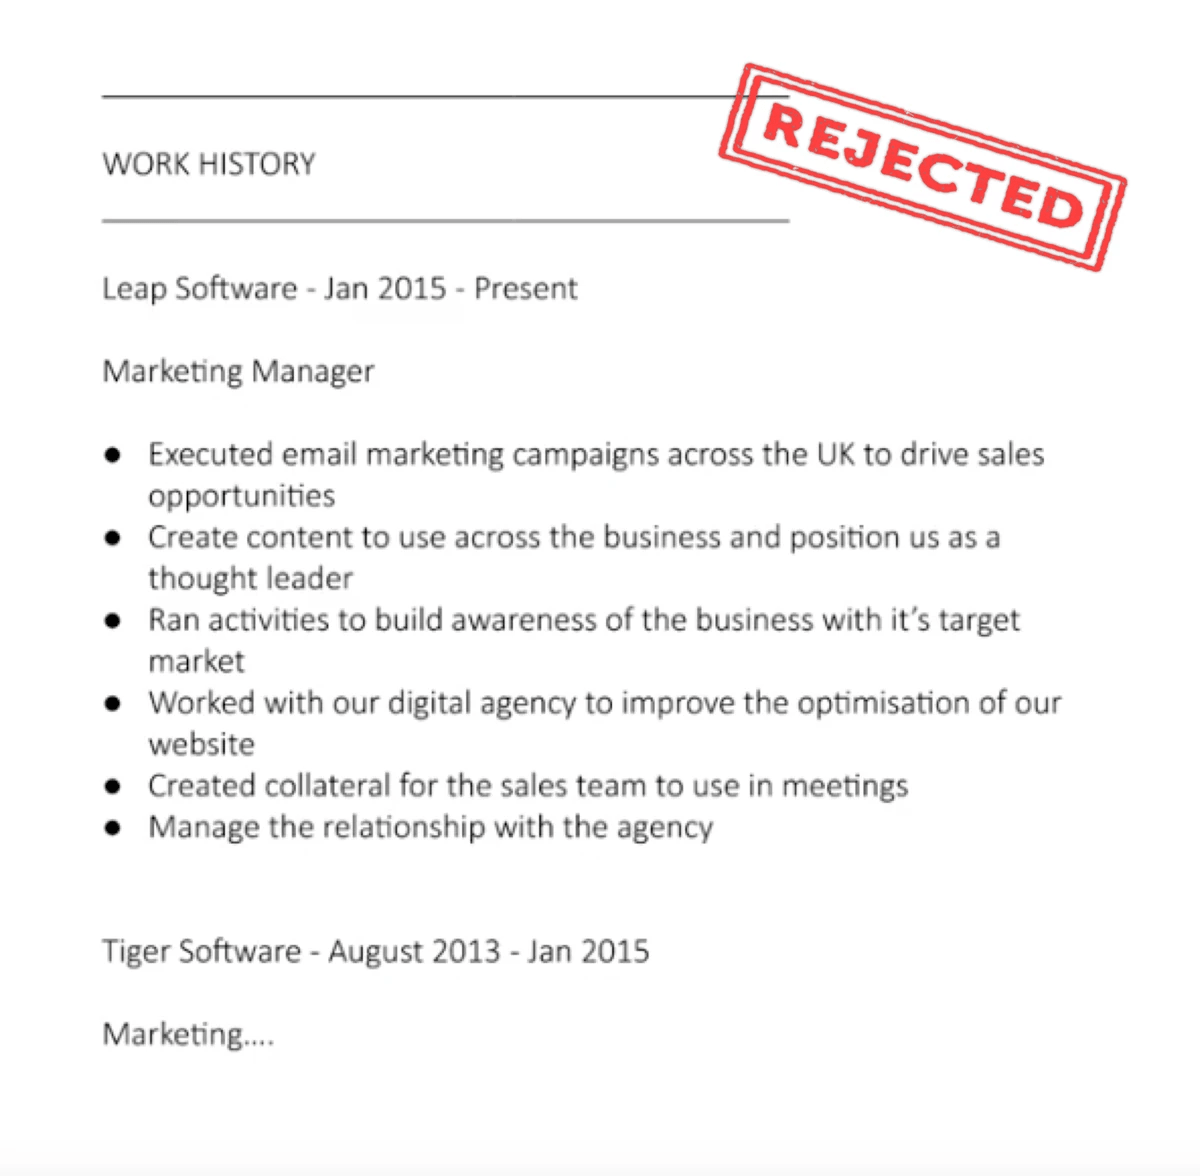 image of a rejected CV